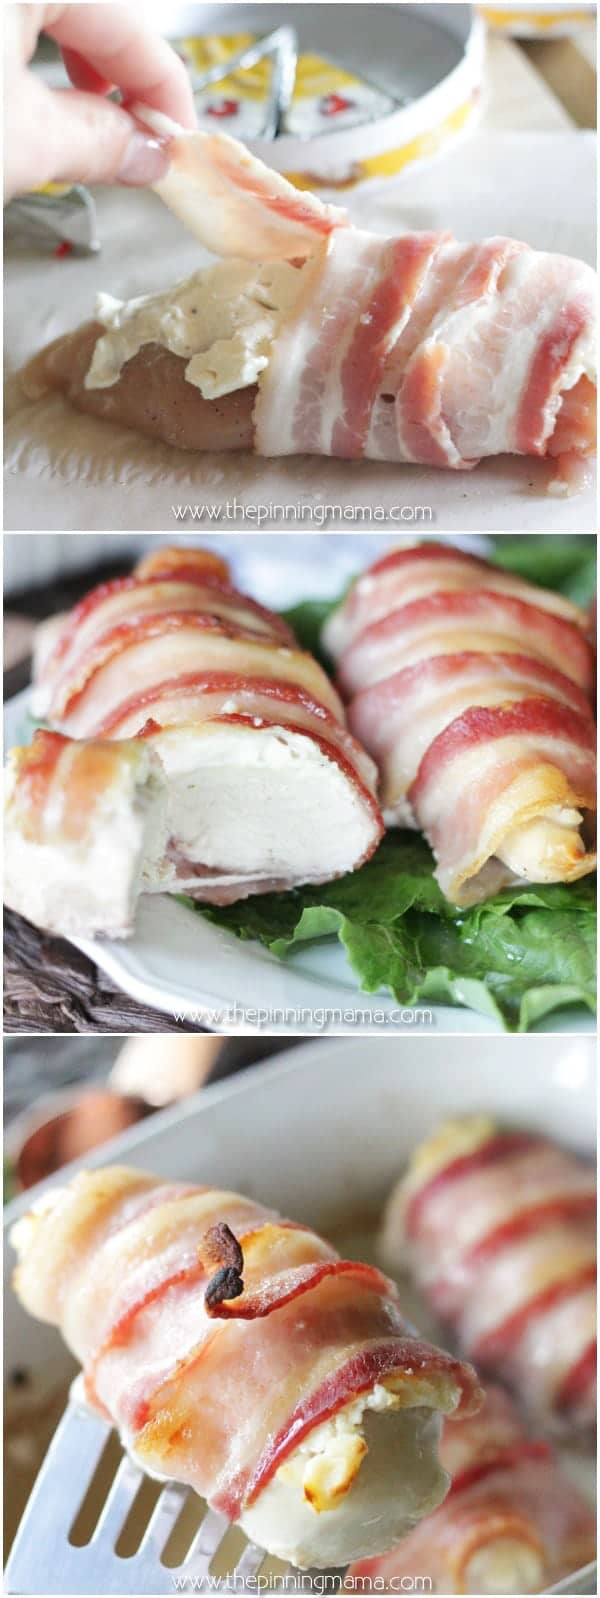 You won't believe how easy this dinner is to make! It looks so fancy but has only 4 ingredients and takes minutes to prep! Bacon wrapped creamy asiago chicken bake recipe. Delicious!